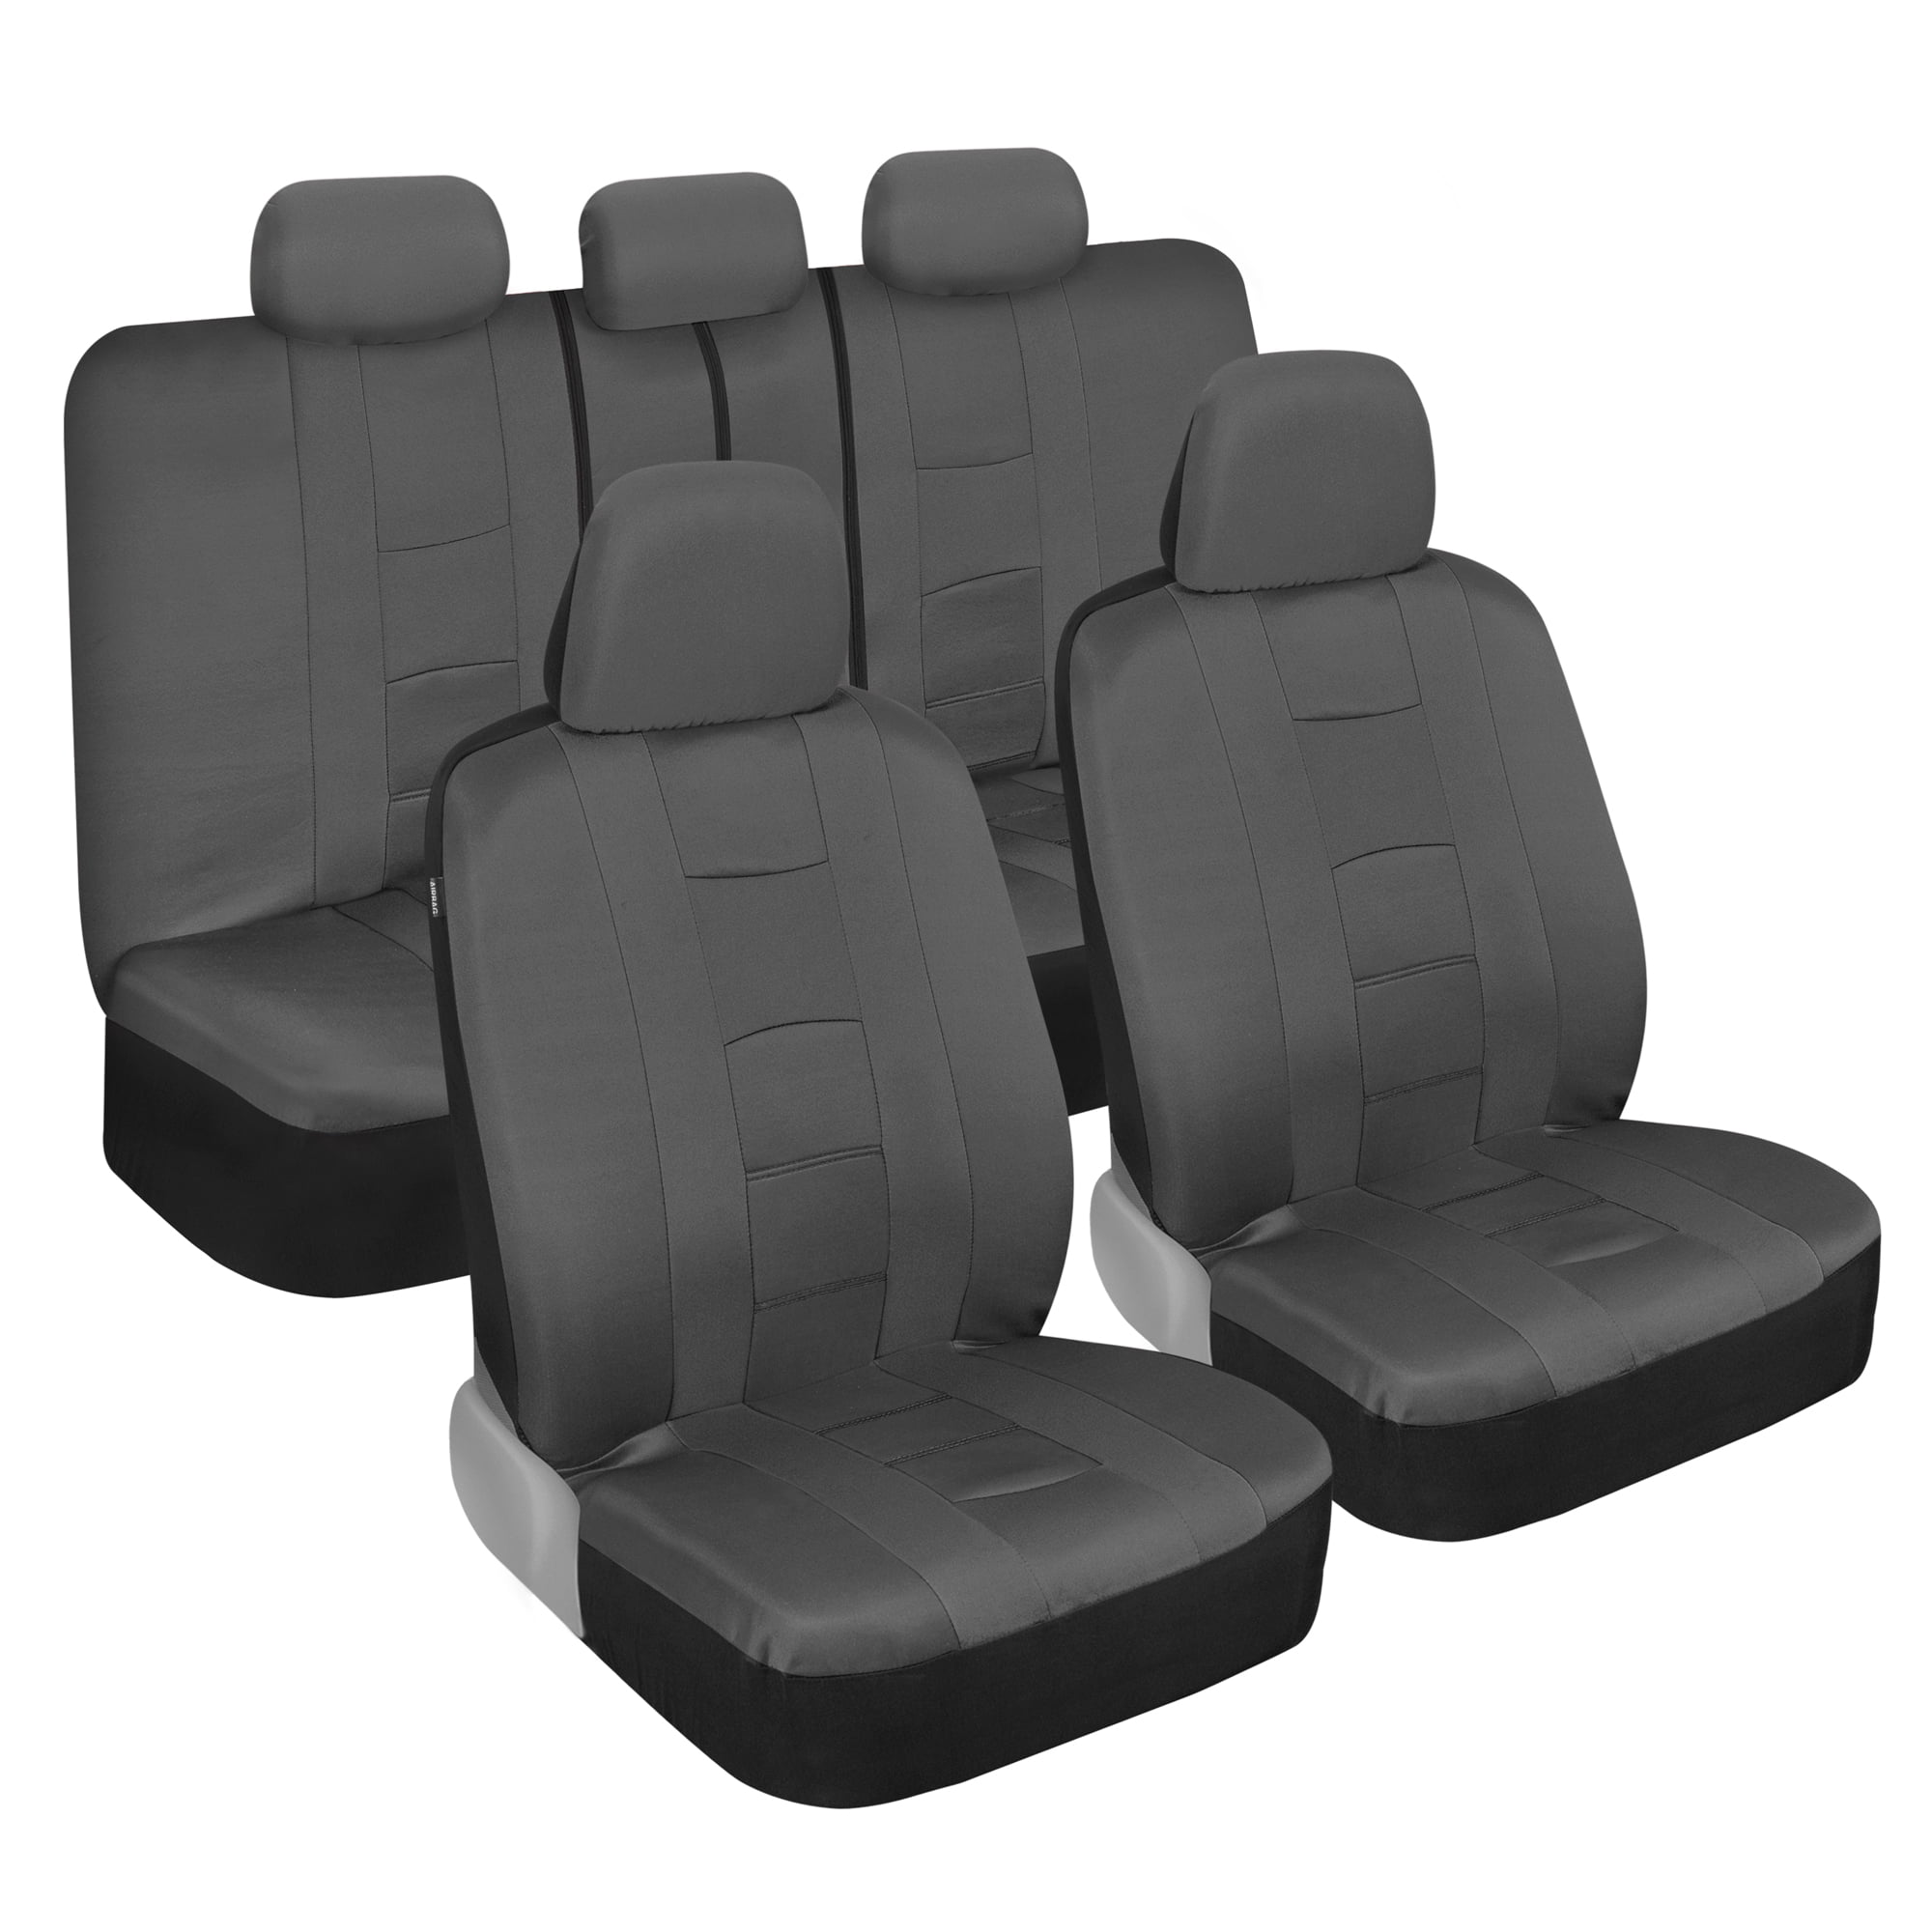 carXS Forza Black Car Seat Covers Full Set, Includes Front Seat Covers and  Rear Bench Seat Cover for Cars Trucks SUV, Automotive Interior Car  Accessories 